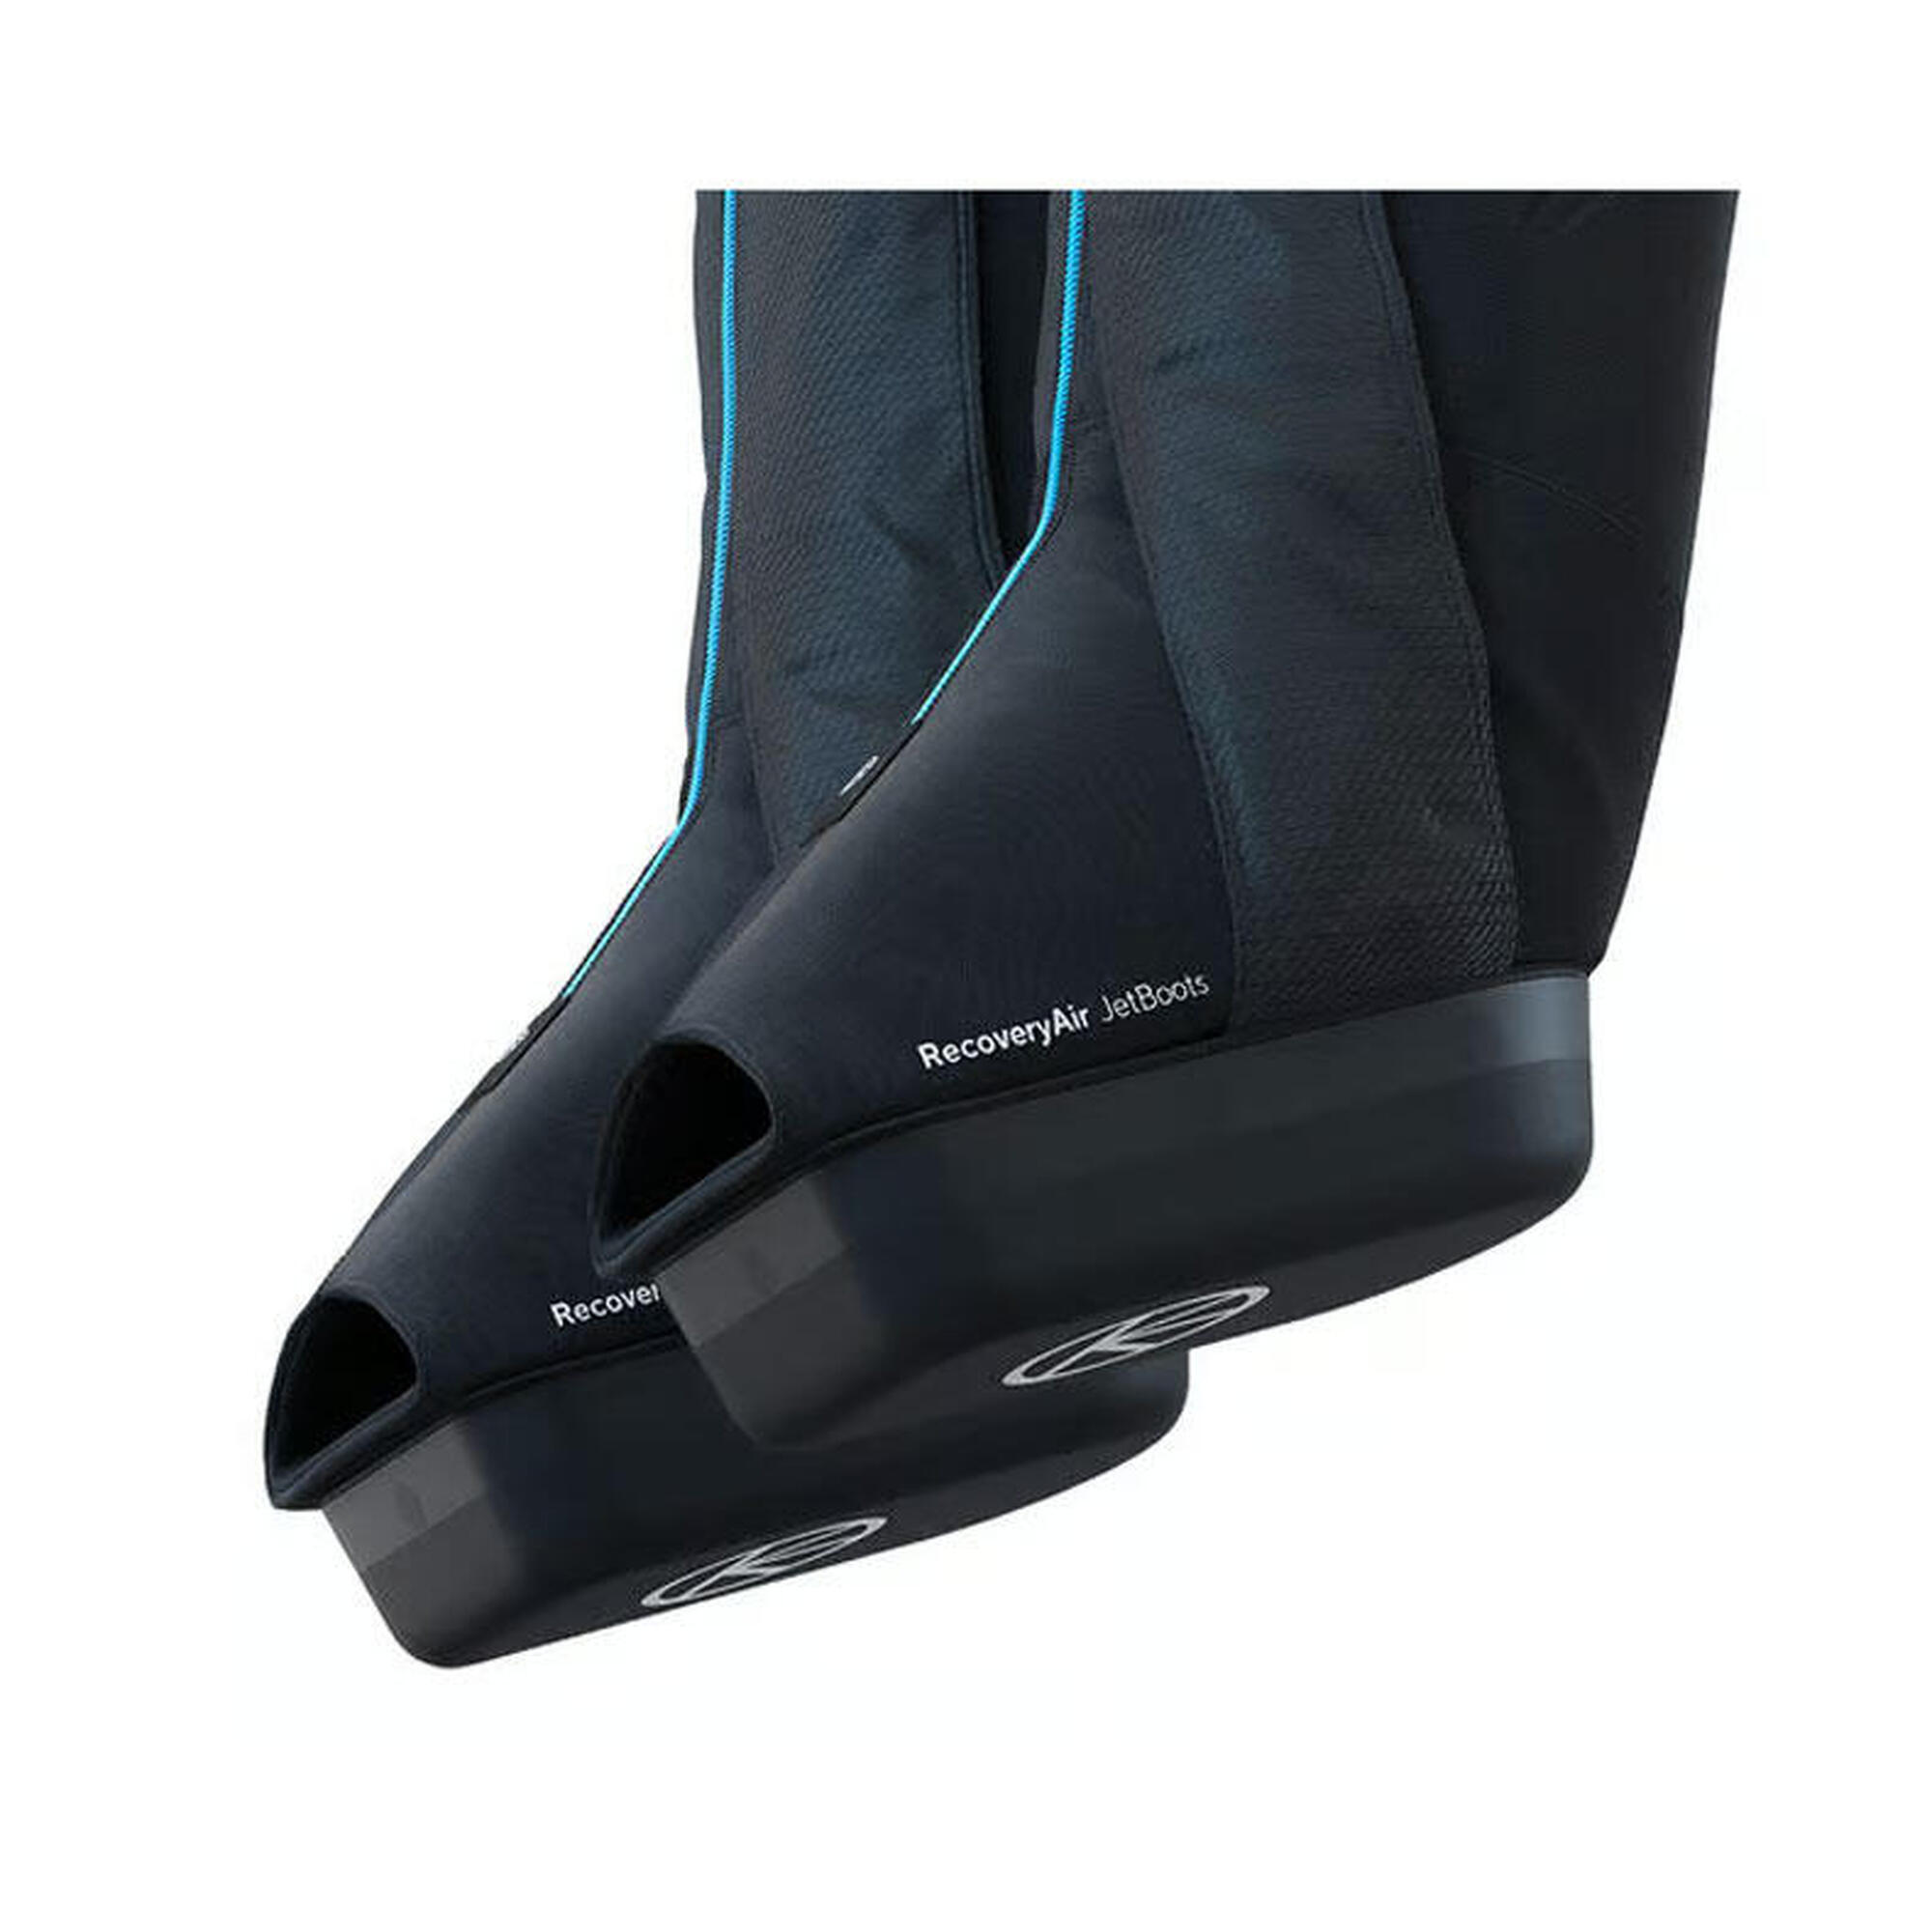 Wireless Boots a compressione Therabody RecoveryAir JetBoots - S